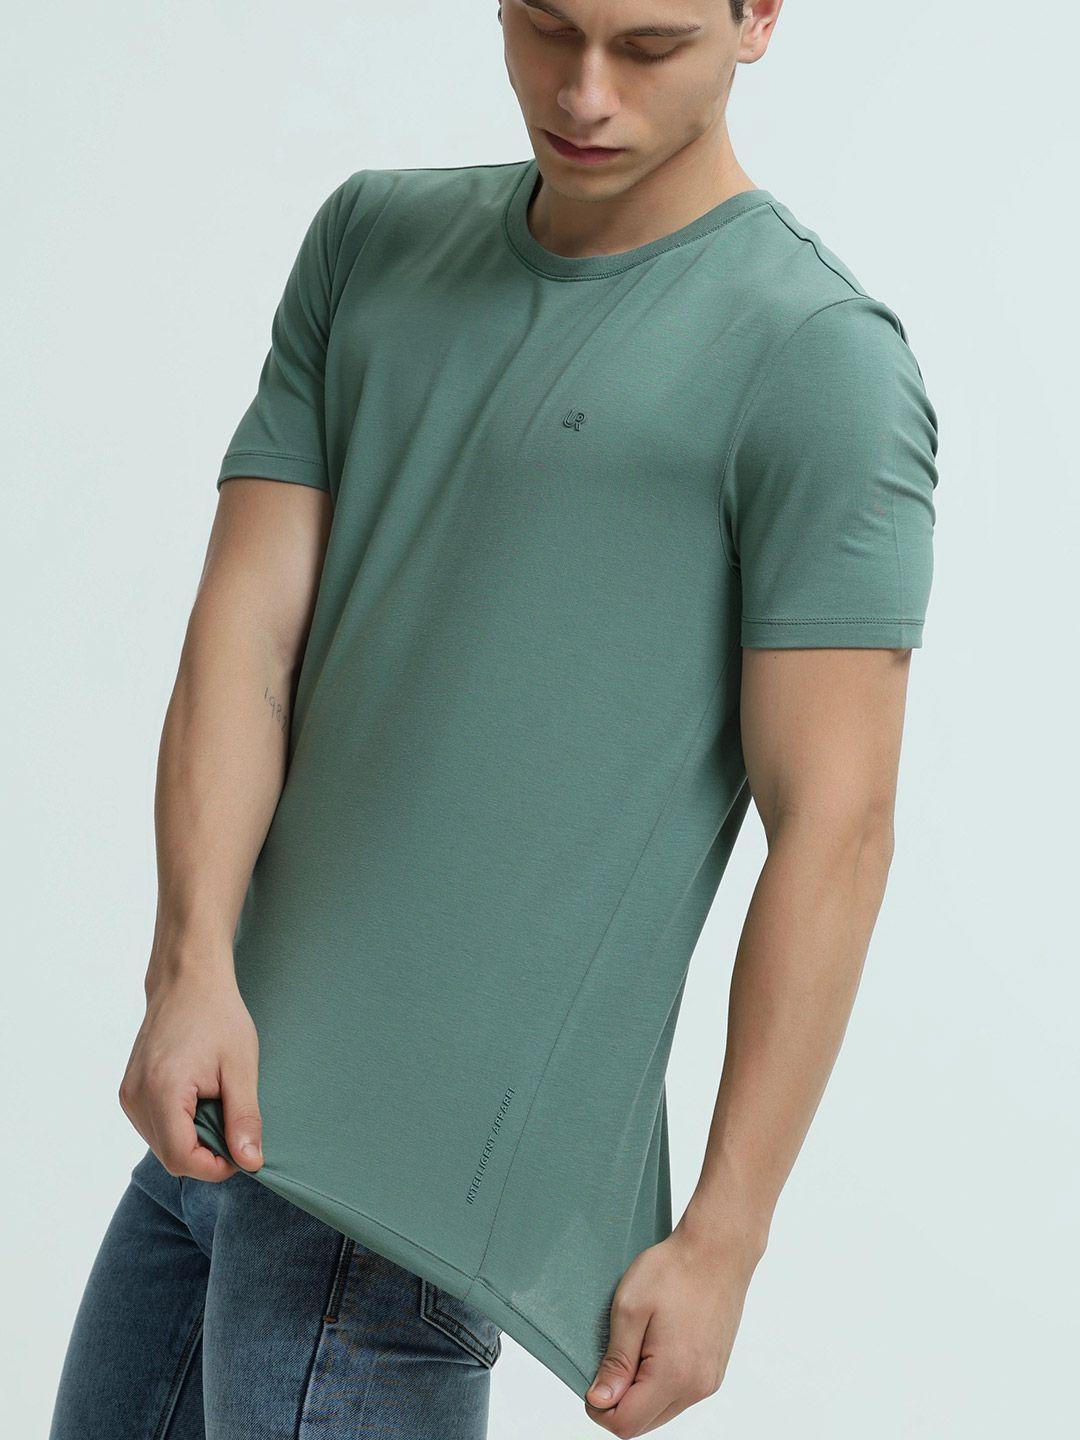 turms-slim-fit-round-neck-short-sleeves-anti-odour-t-shirt